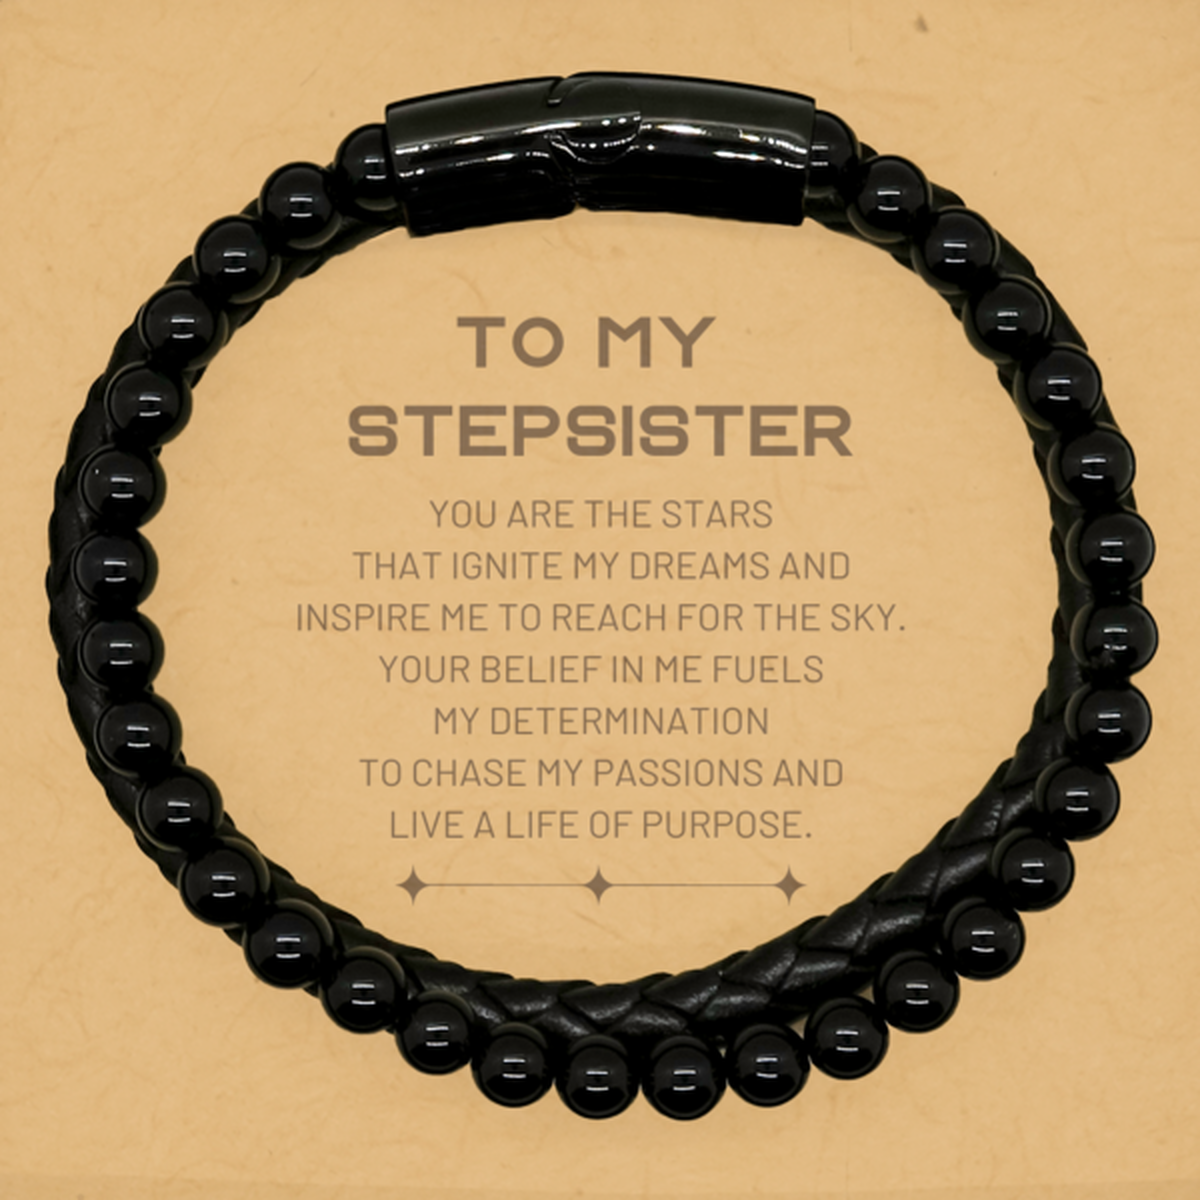 To My Stepsister Stone Leather Bracelets, You are the stars that ignite my dreams and inspire me to reach for the sky, Birthday Unique Gifts For Stepsister, Thank You Gifts For Stepsister